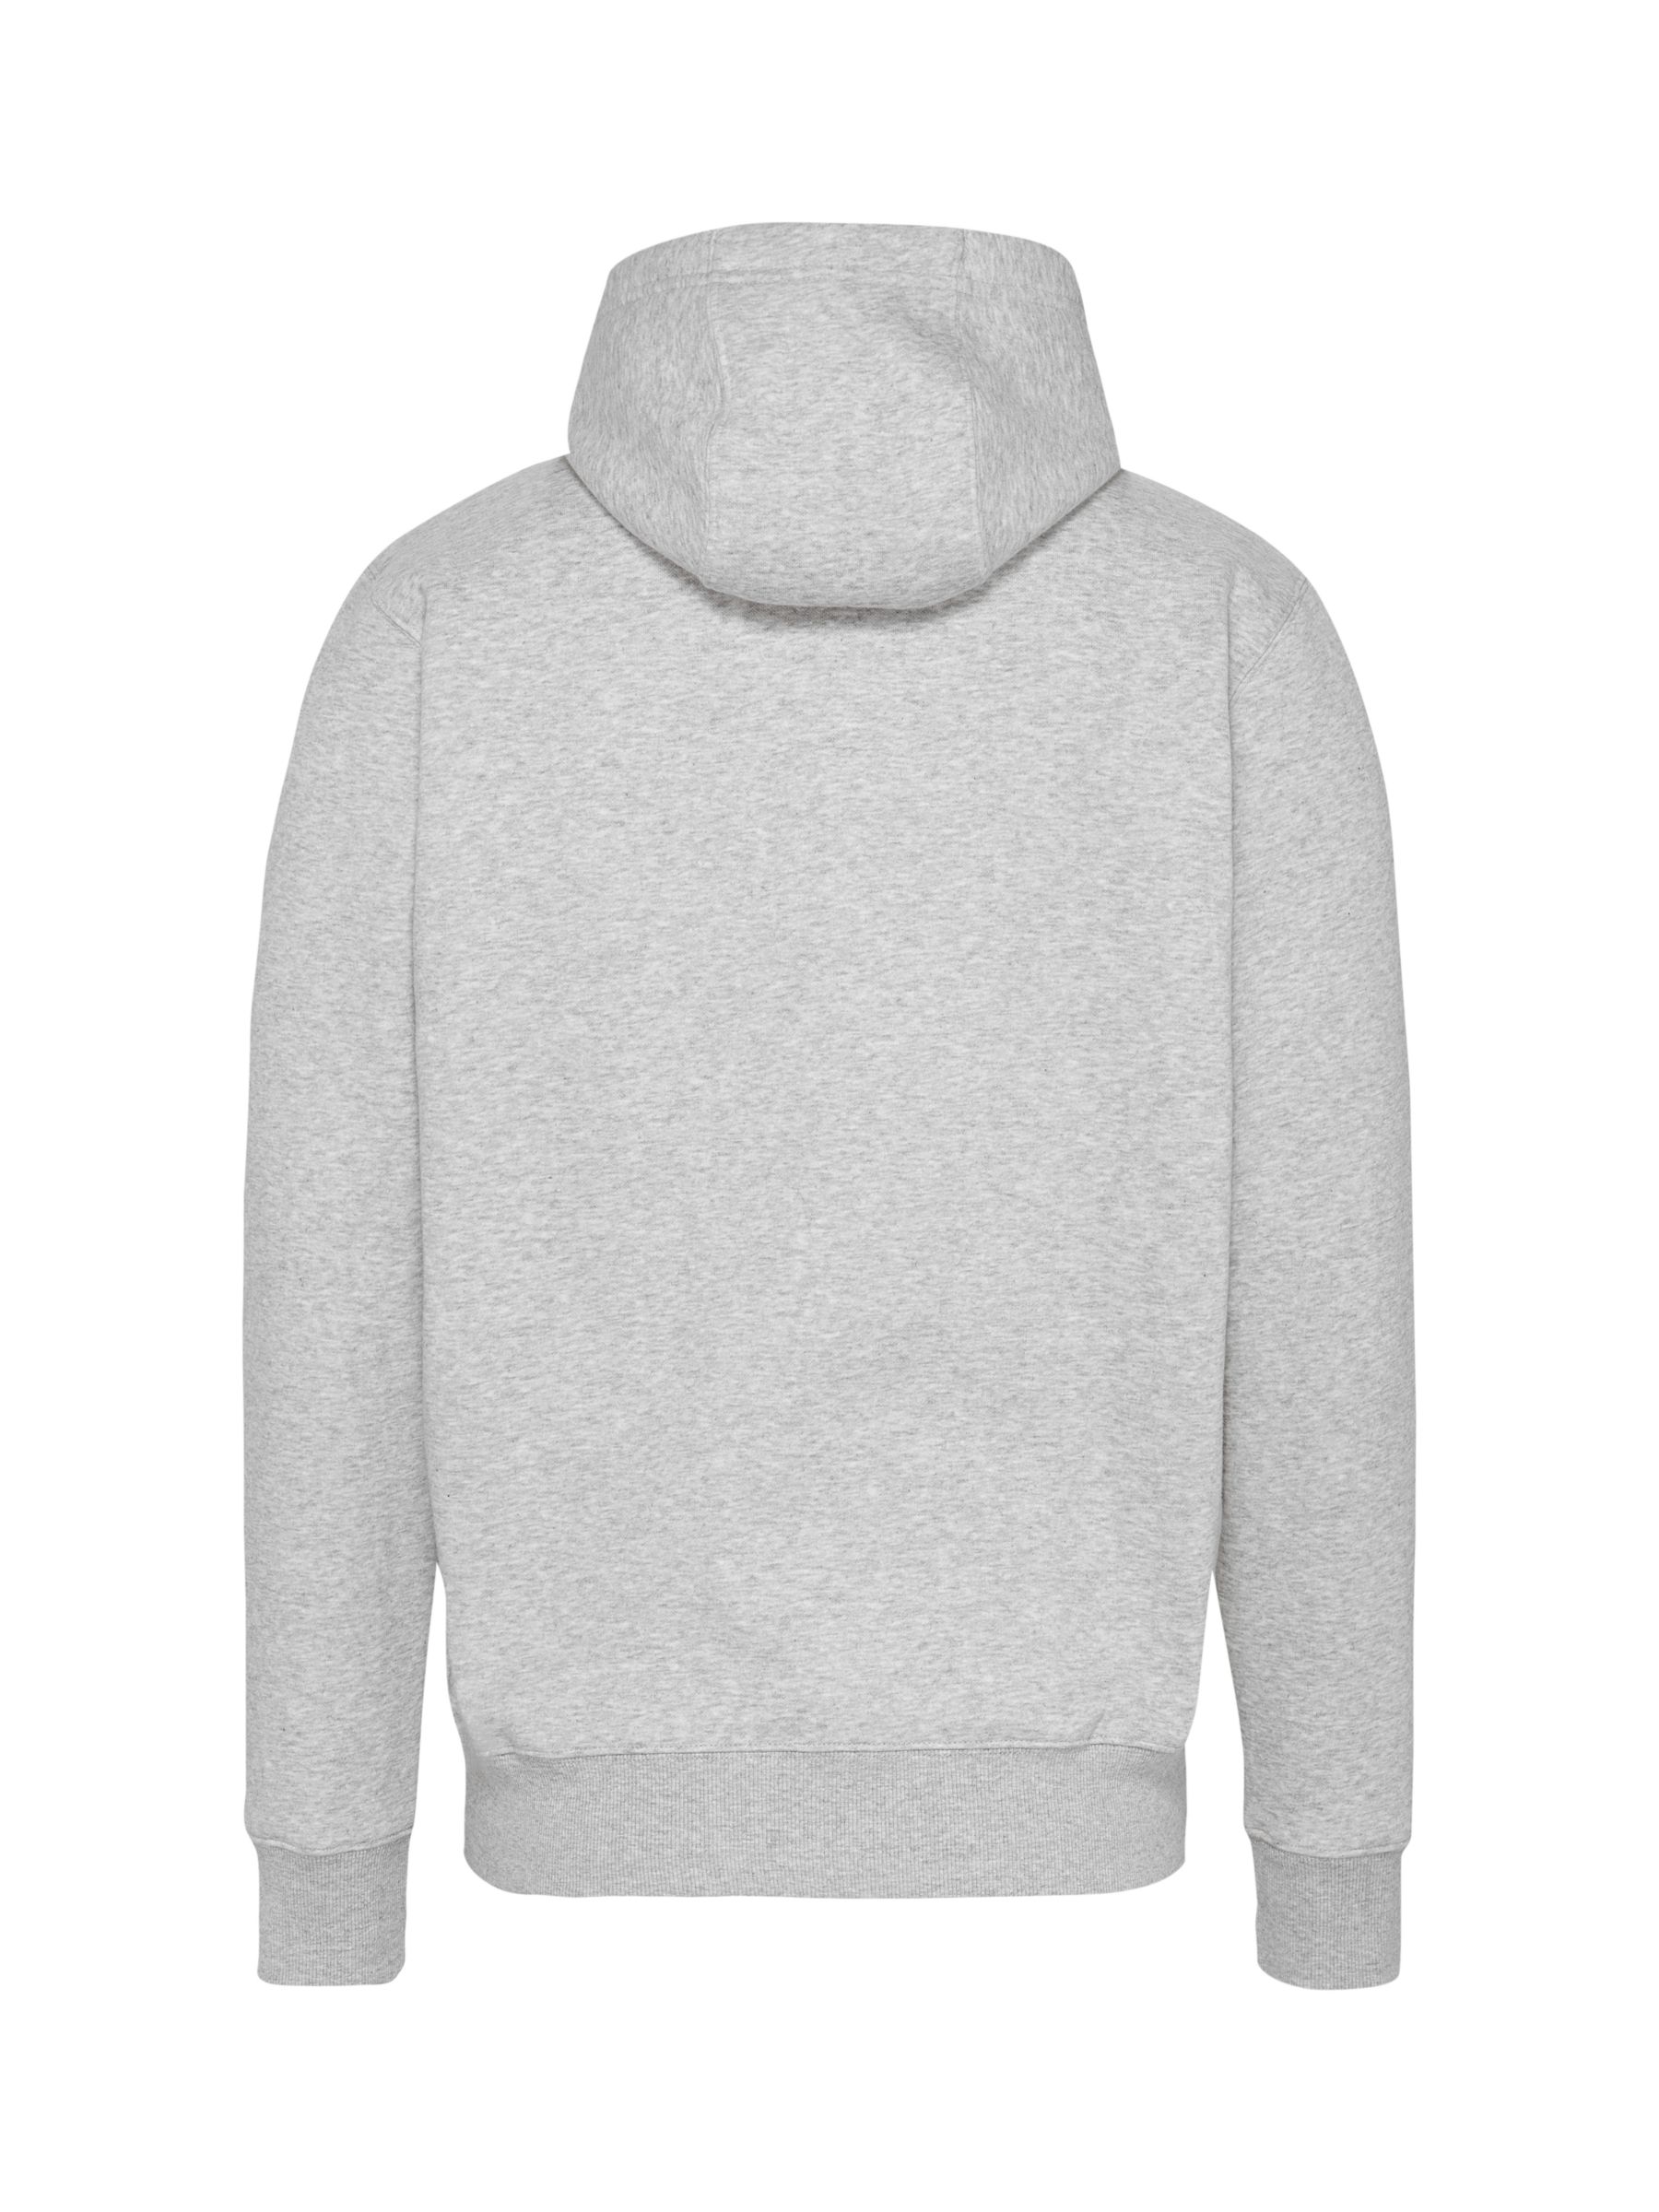 Tommy Hilfiger Small Flag Hoodie, Light Grey at John Lewis & Partners